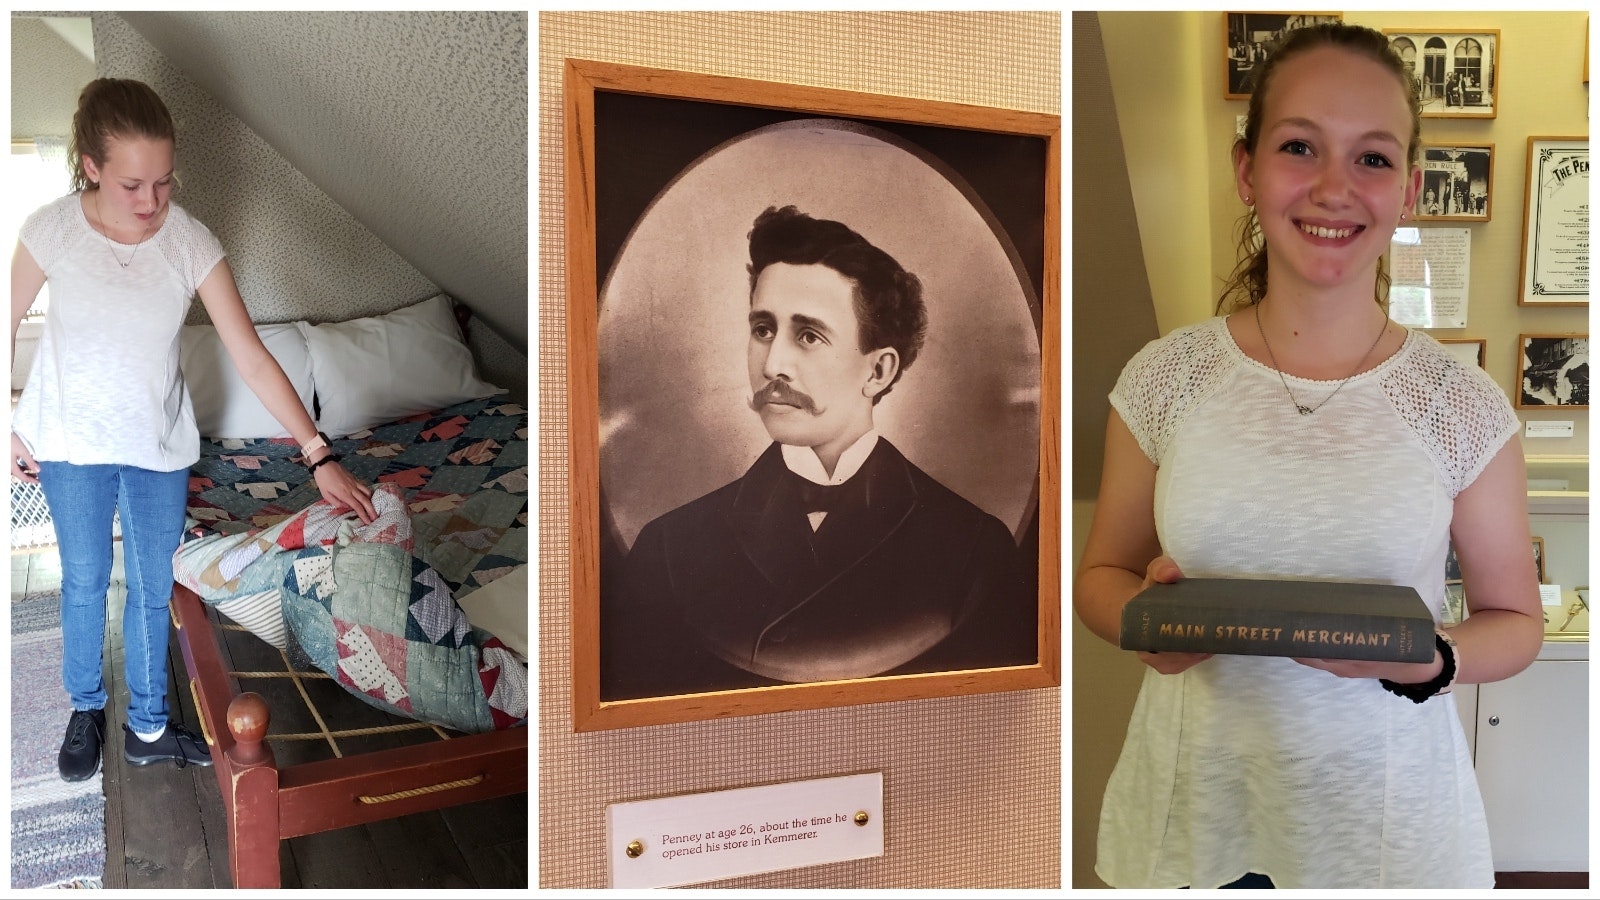 Janelle Sawaya lifts a mattress to show the ropes that held it up; James Cash Penney at 26, about the age he opened his Kemmerer store; Sawaya holds up one of the books she's read about James Cash Penney in the museum where she is a summer tour guide.